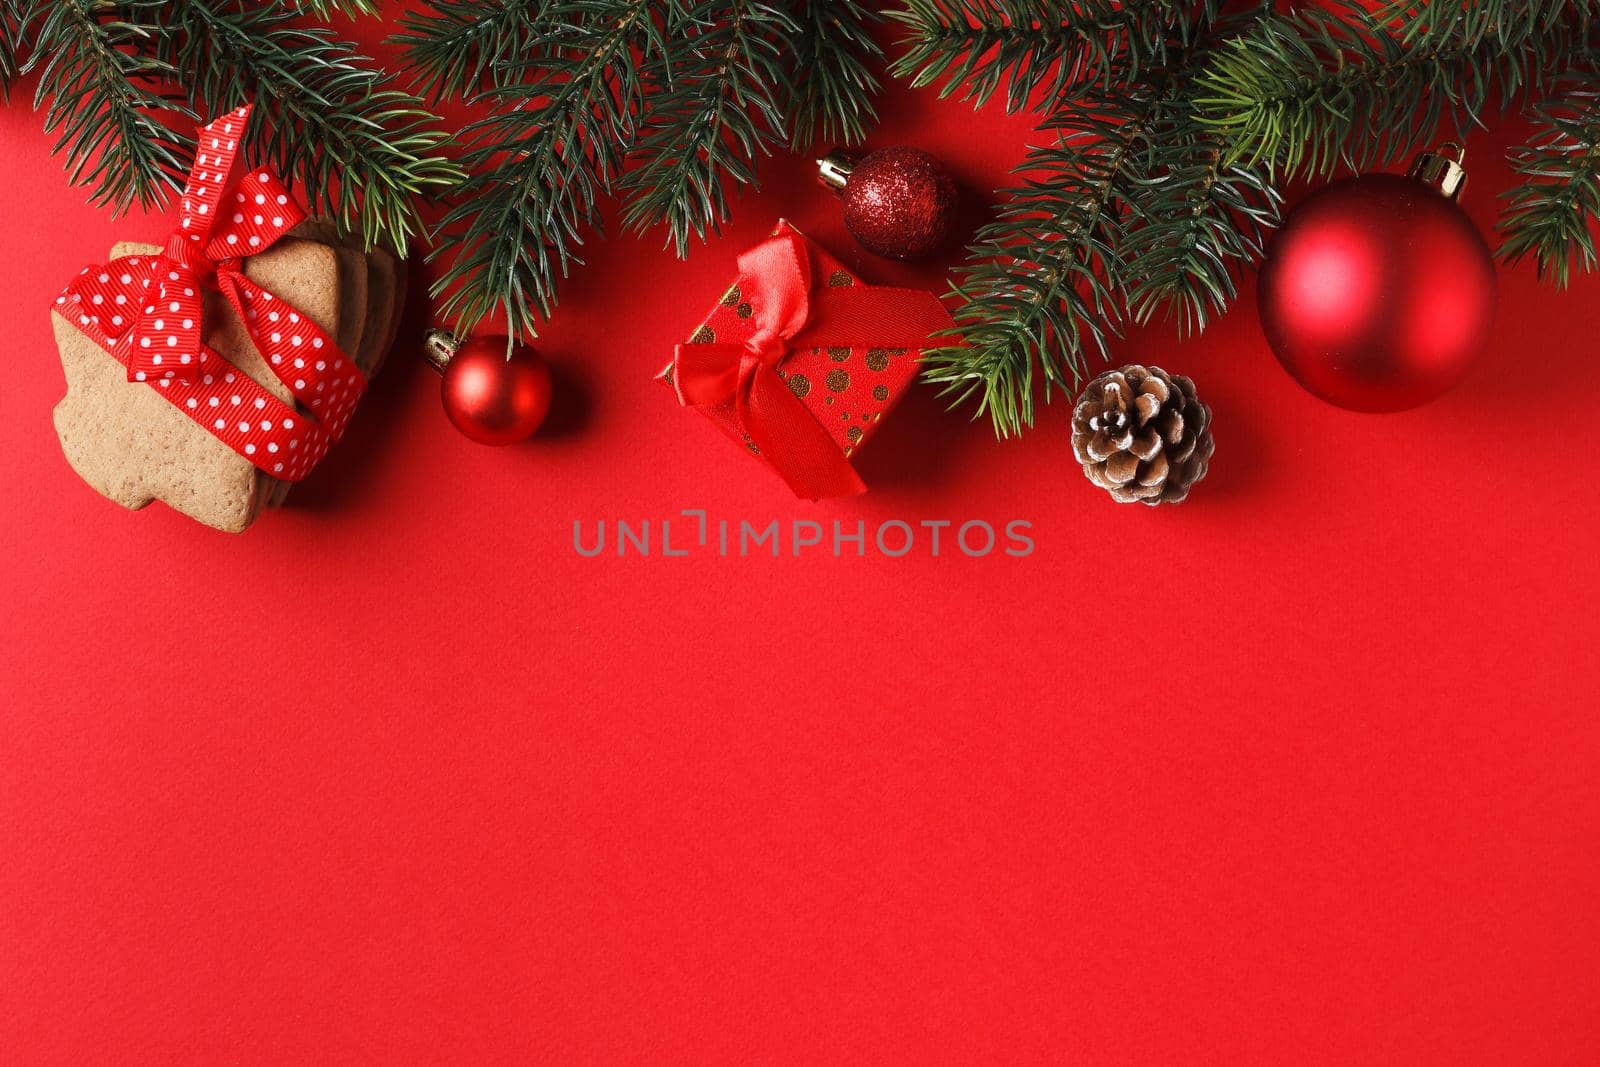 Delicious gingerbread and Christmas decor on a red background. copy space.